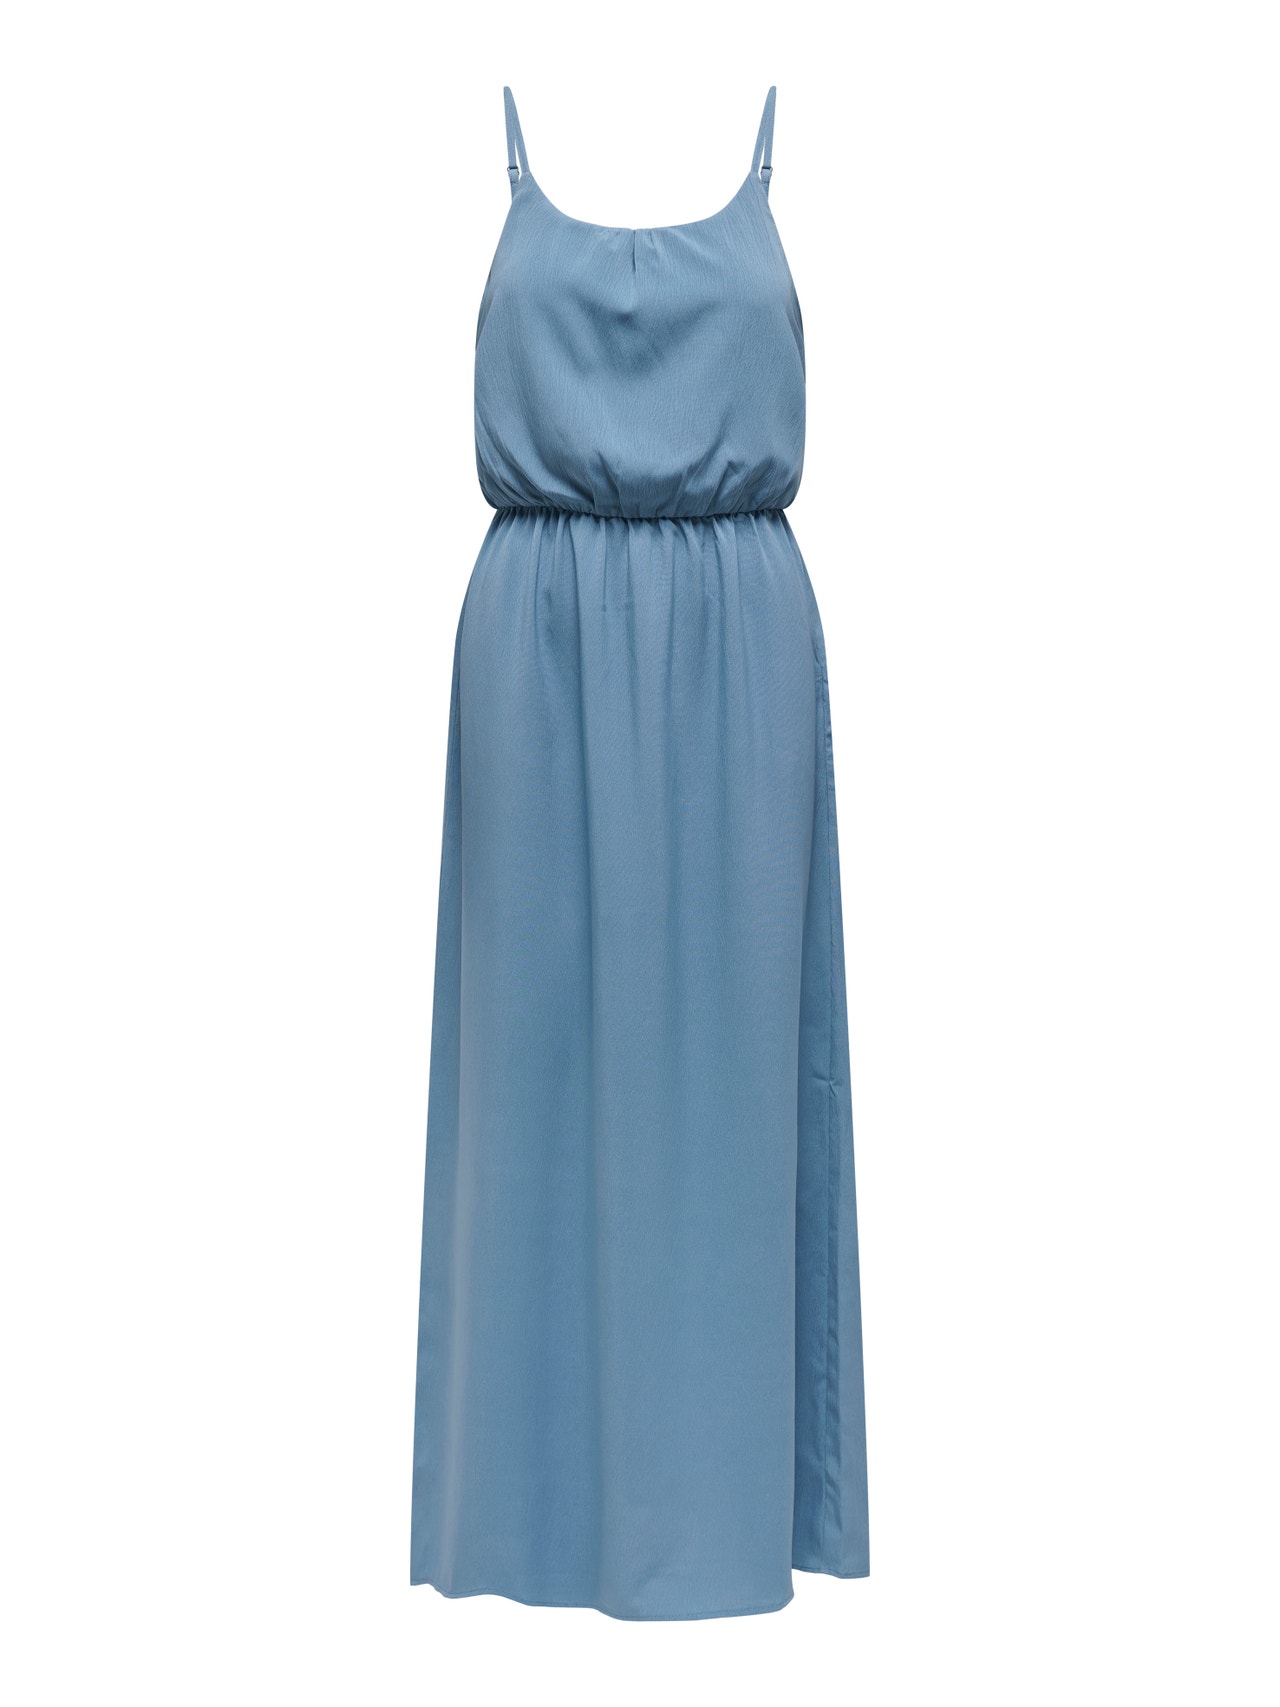 ONLY maxi dress with shoulder straps -Coronet Blue - 15335556